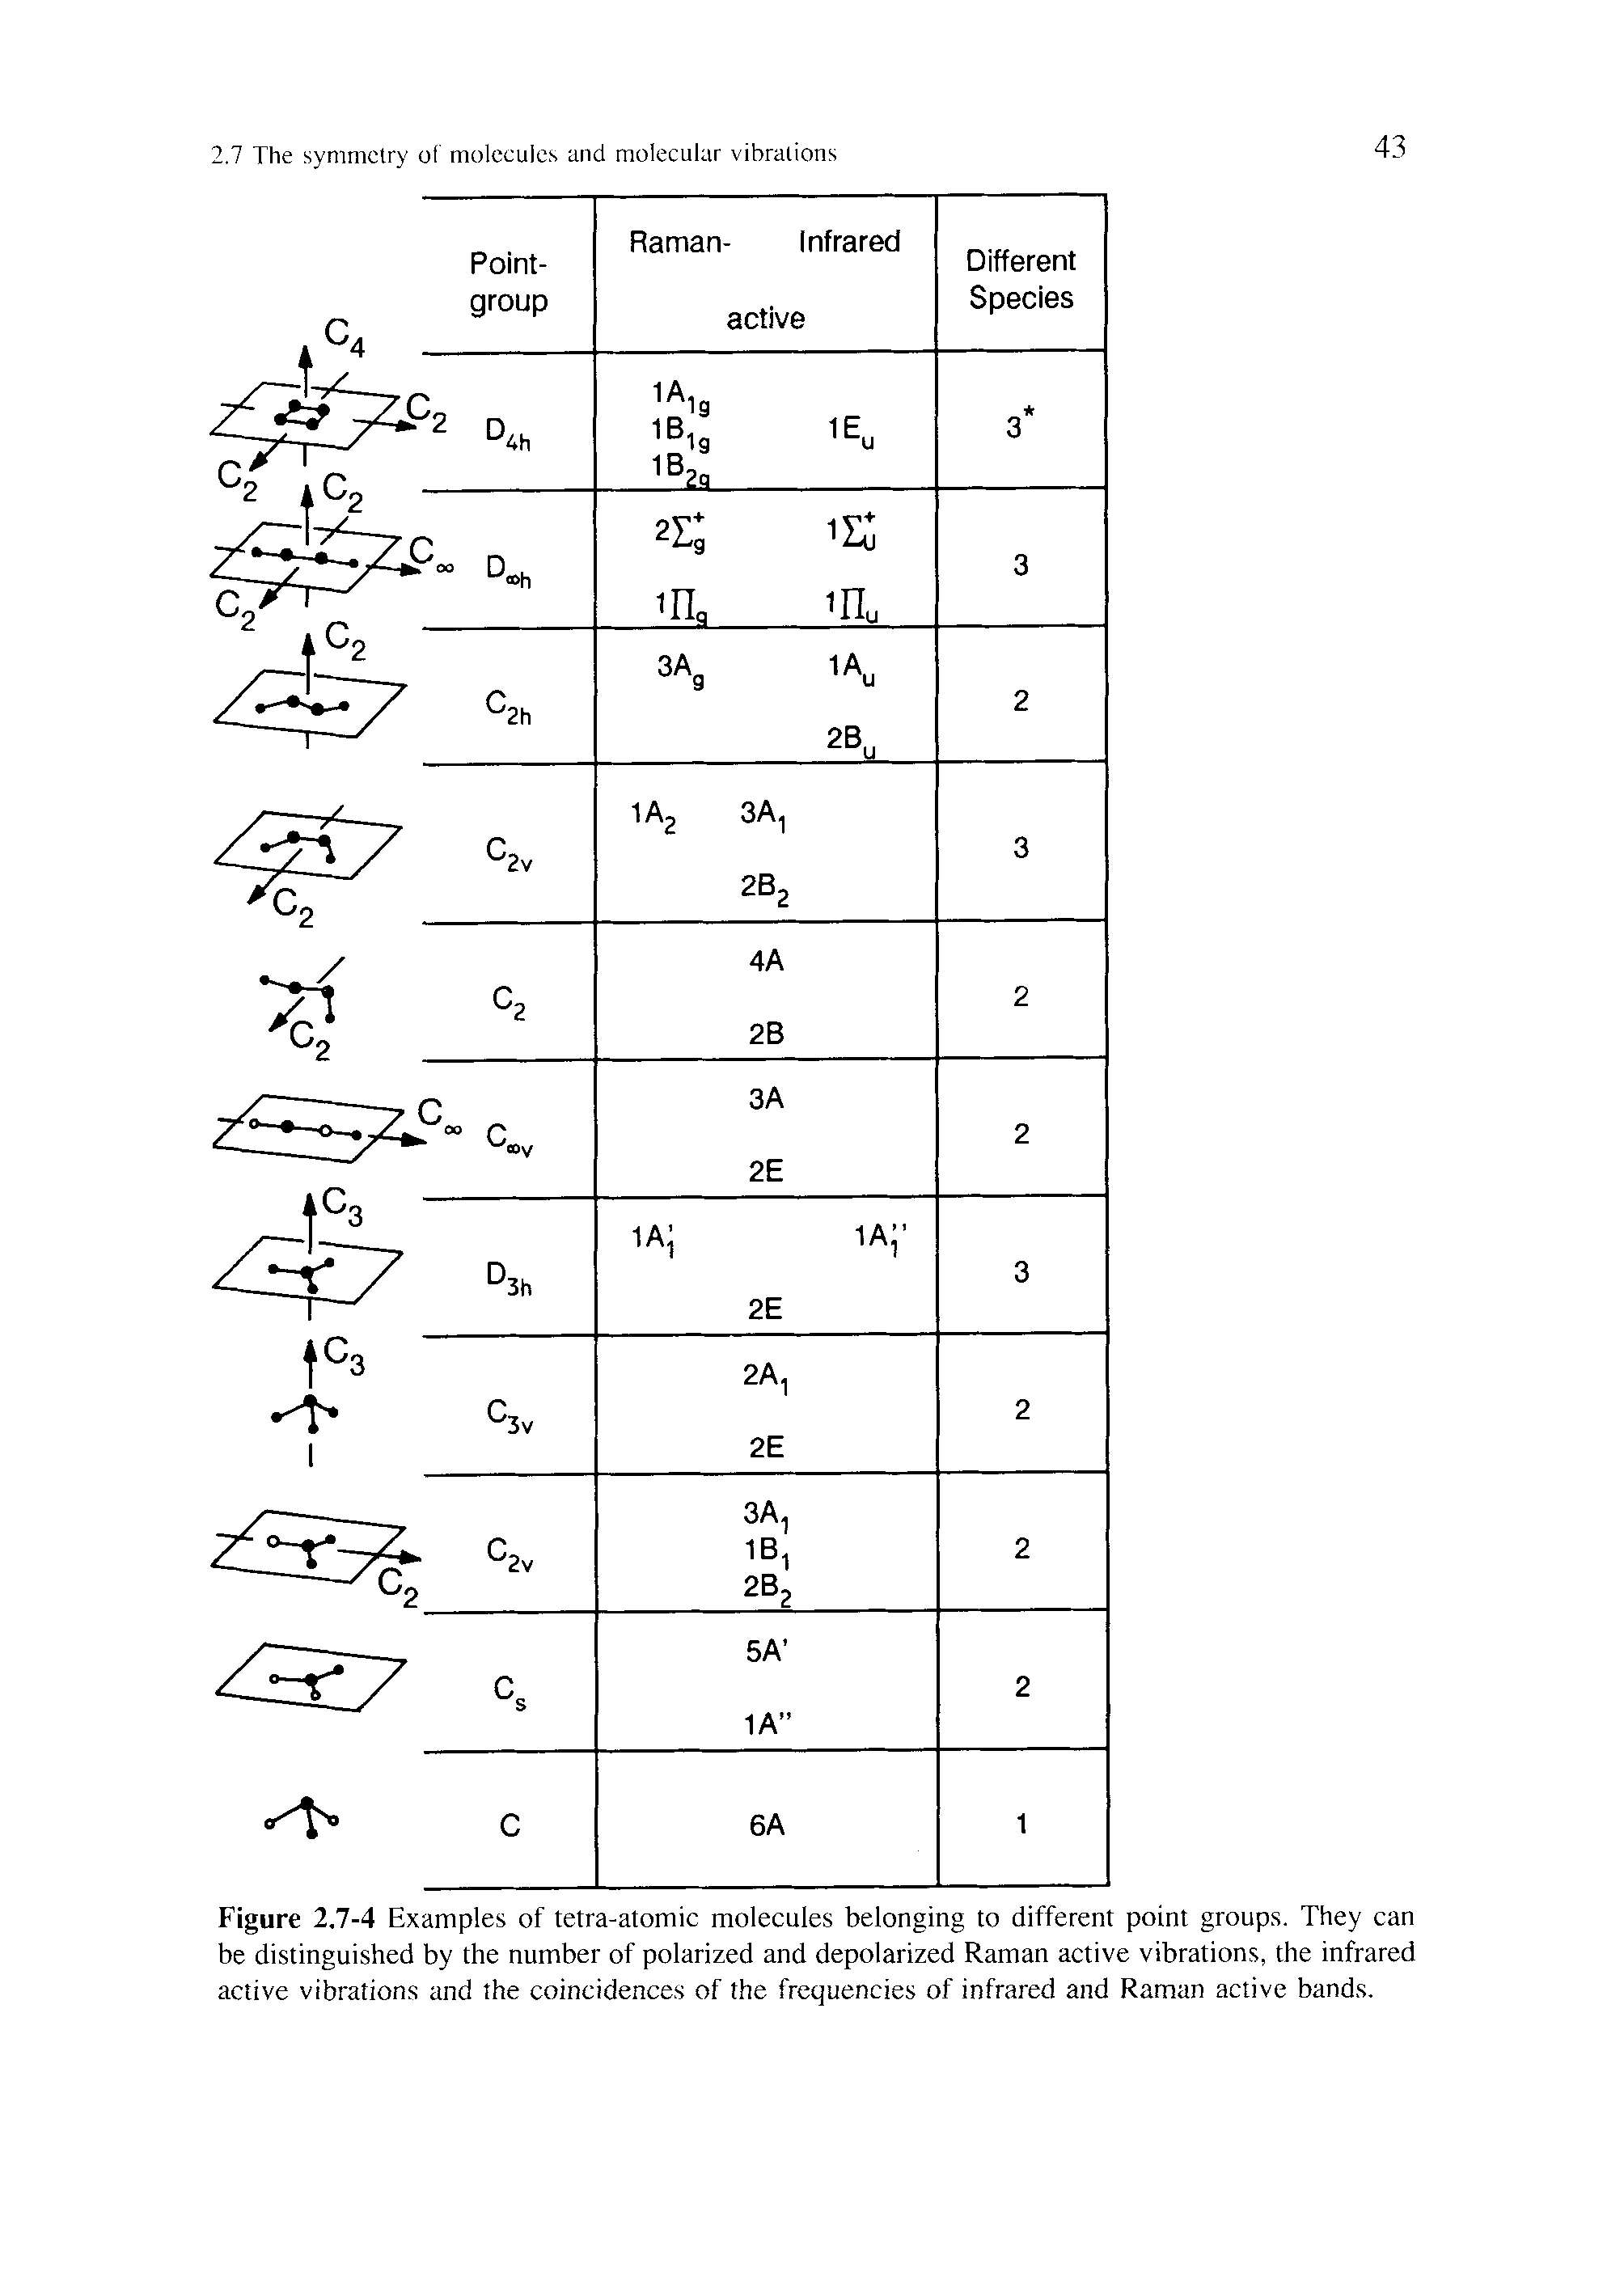 Figure 2.7-4 Examples of tetra-atomic molecules belonging to different point groups. They can be distinguished by the number of polarized and depolarized Raman active vibrations, the infrared active vibrations and the coincidences of the frequencies of infrared and Raman active bands.